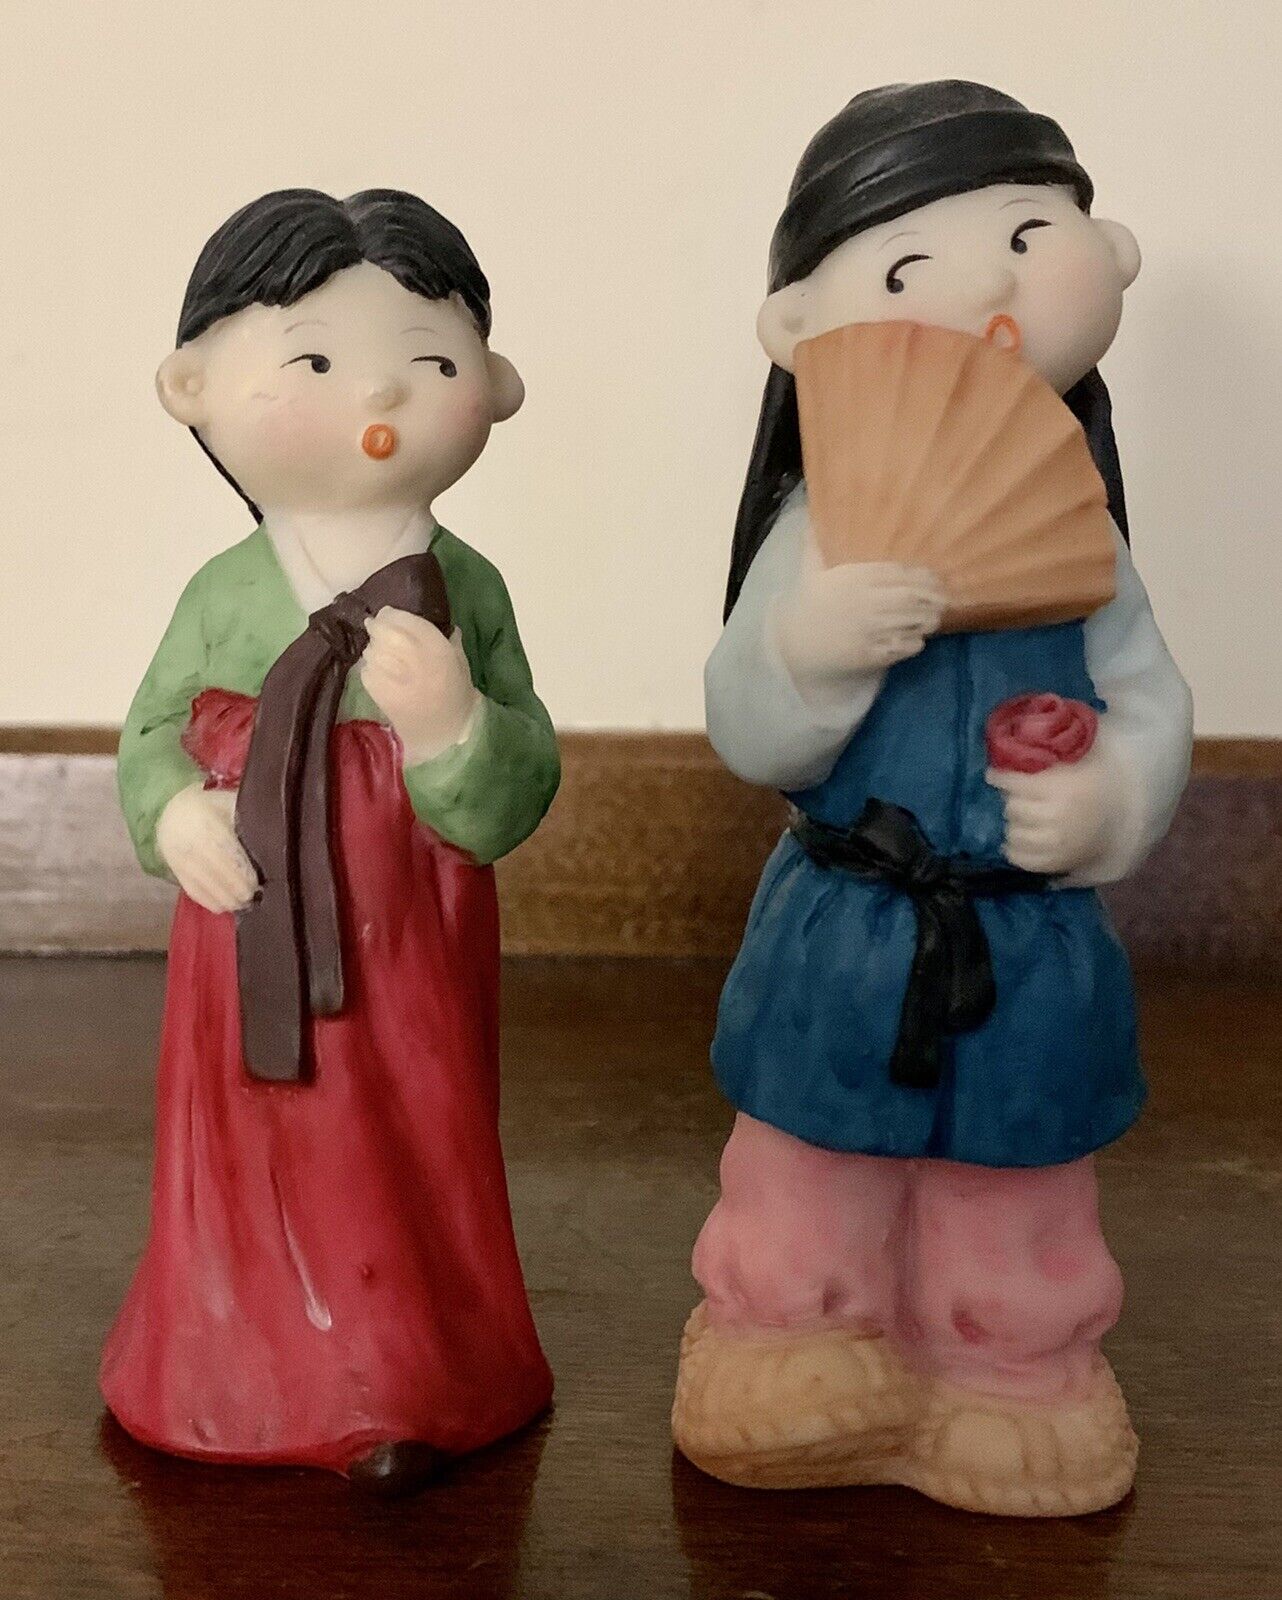 Vintage hand painted Koreart Boy and Girl Figurine Statue  4 3/4” Tall